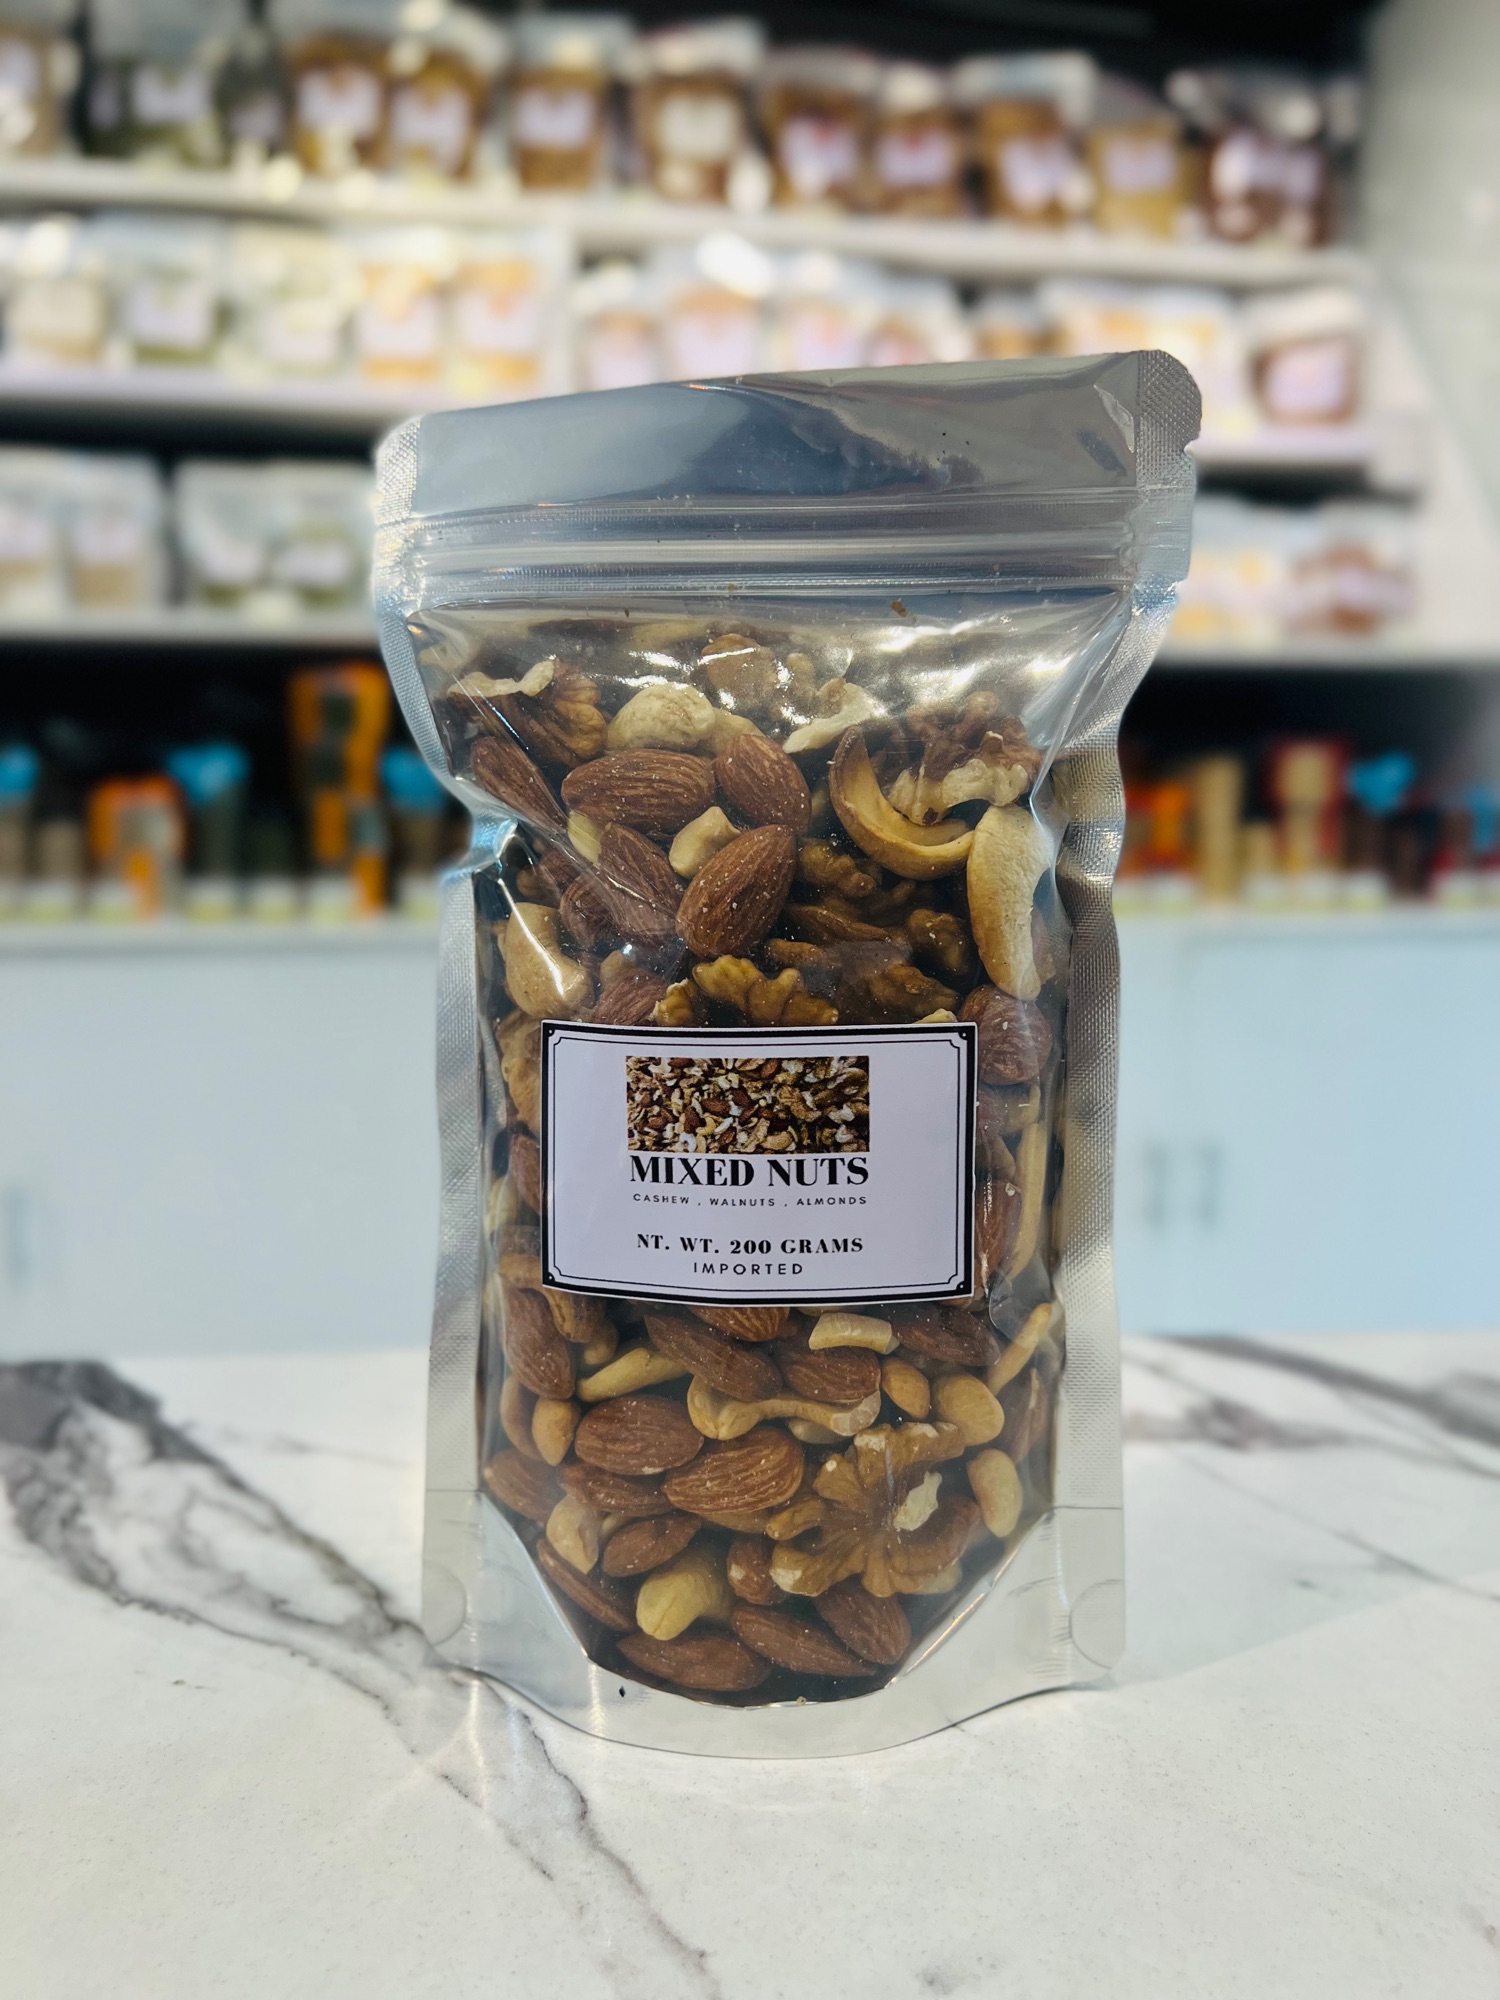 Mixed Nuts 200grams - Imported